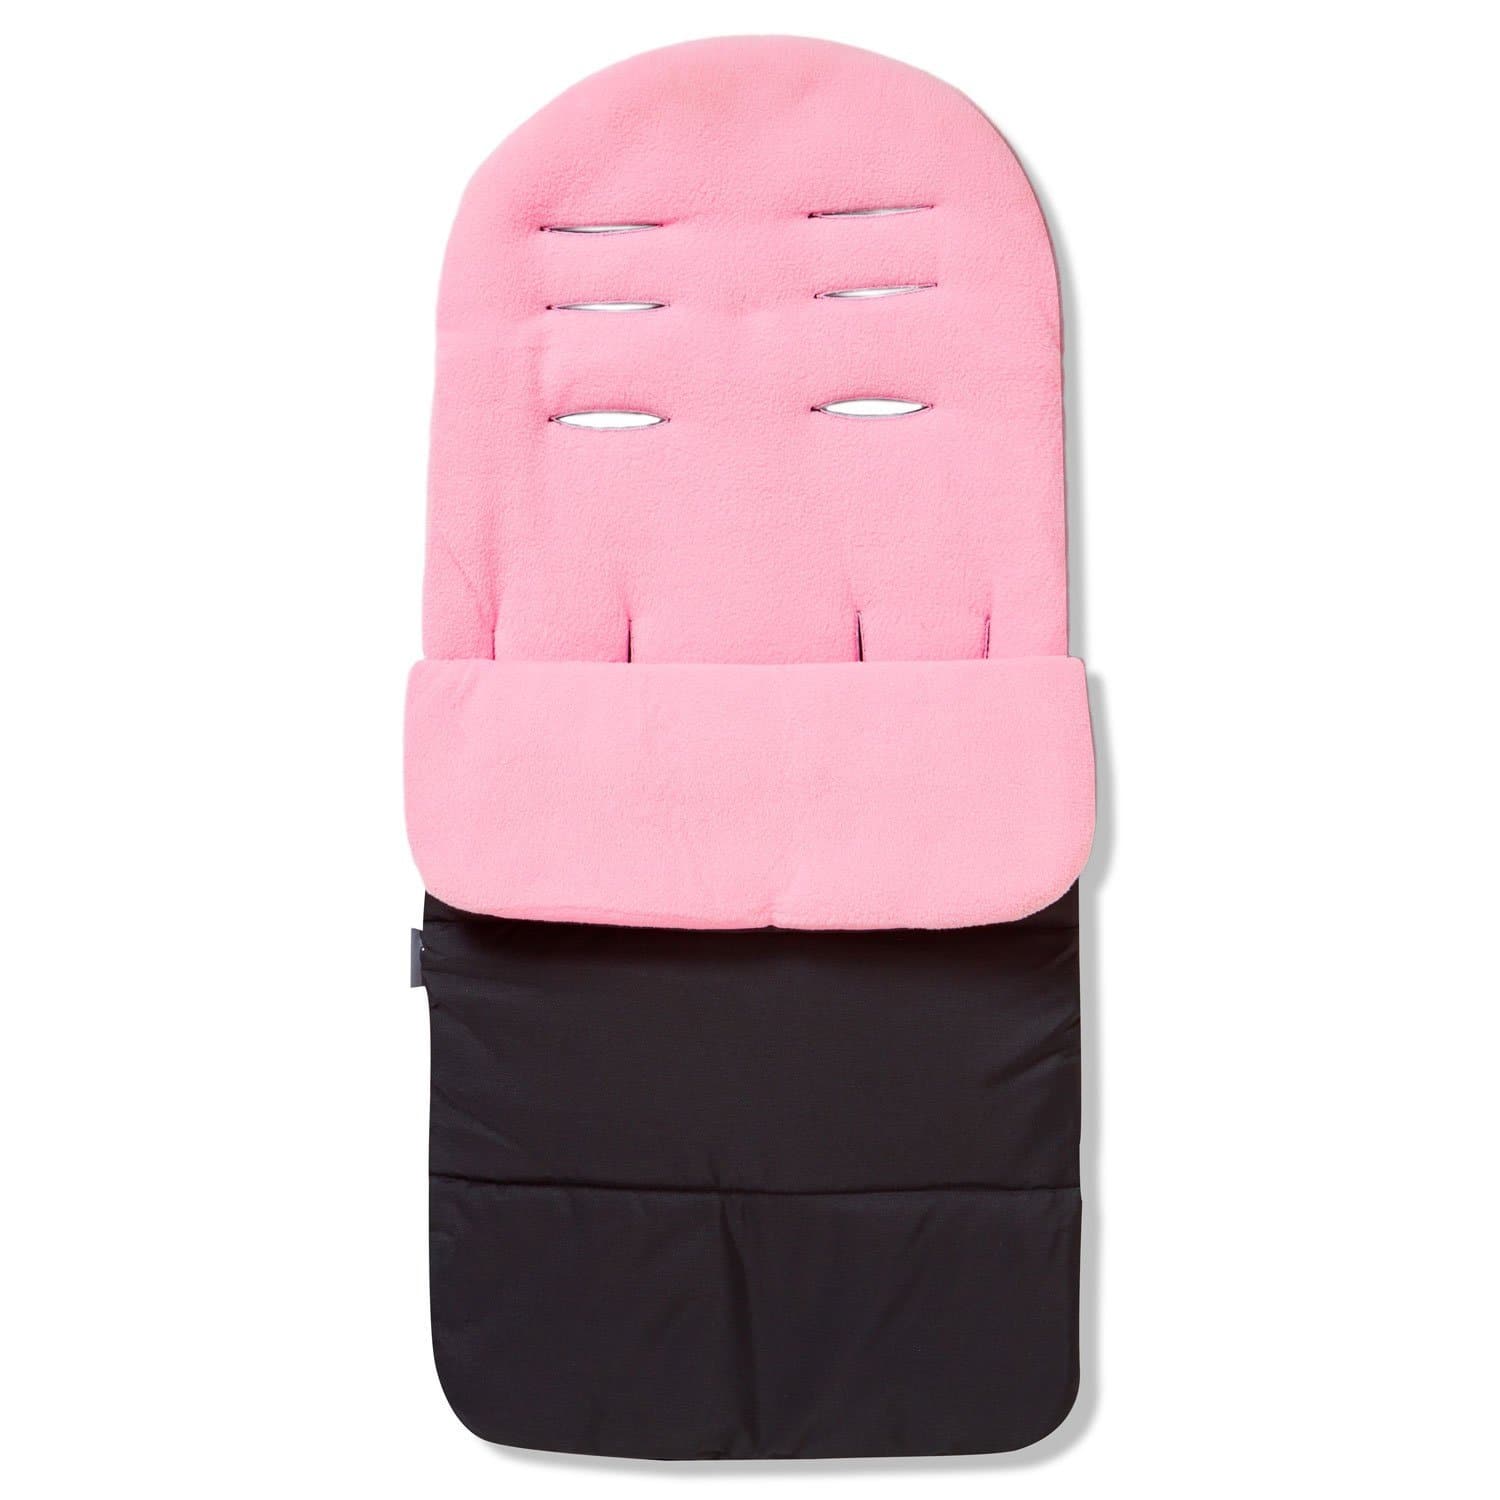 Premium Footmuff / Cosy Toes Compatible with Graco - Candy Pink / Fits All Models | For Your Little One